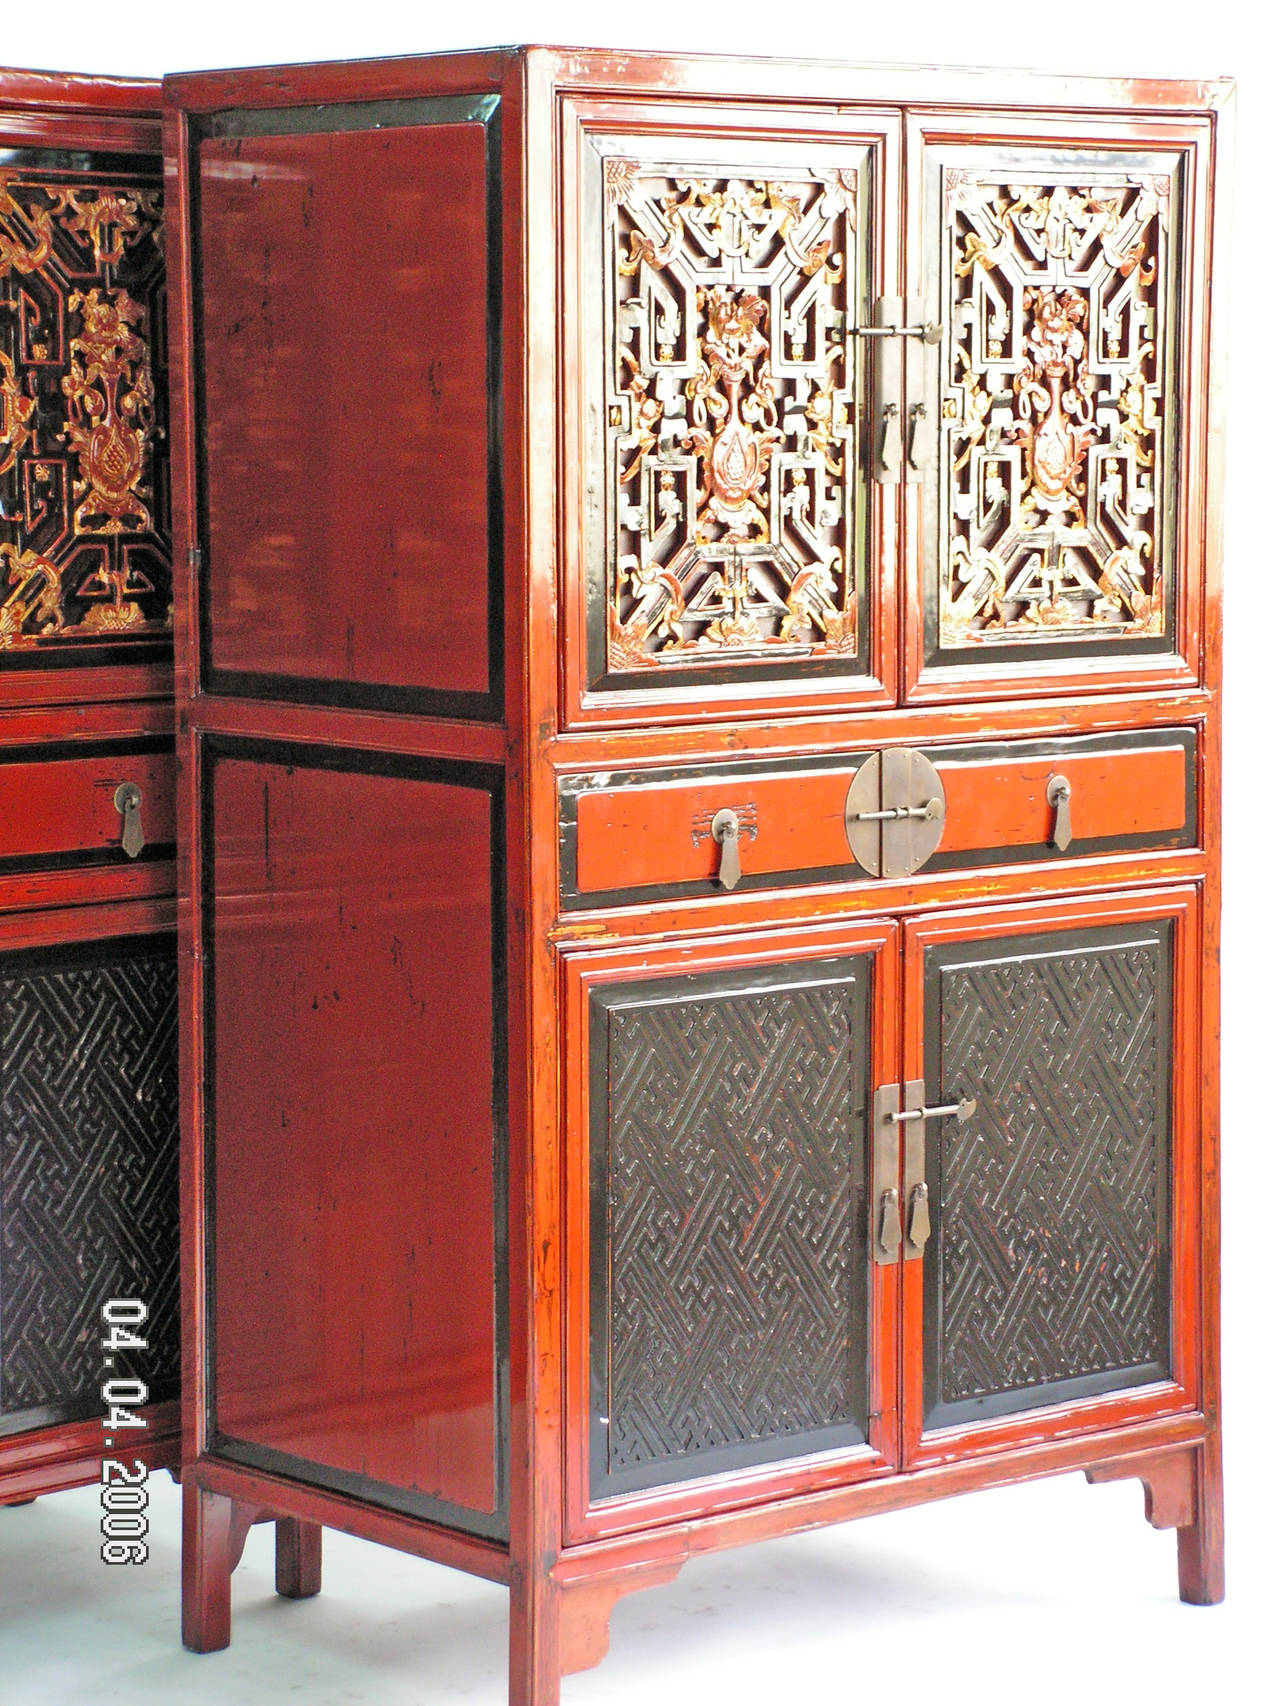 A fabulous pair of square corner cabinets covered in rich red lacquer, the upper paneled doors decorated with relief-carved gilt fretwork, scholastic flower and vase motif, and bats (good luck and fortune symbol), above two drawers, a  pair of lower